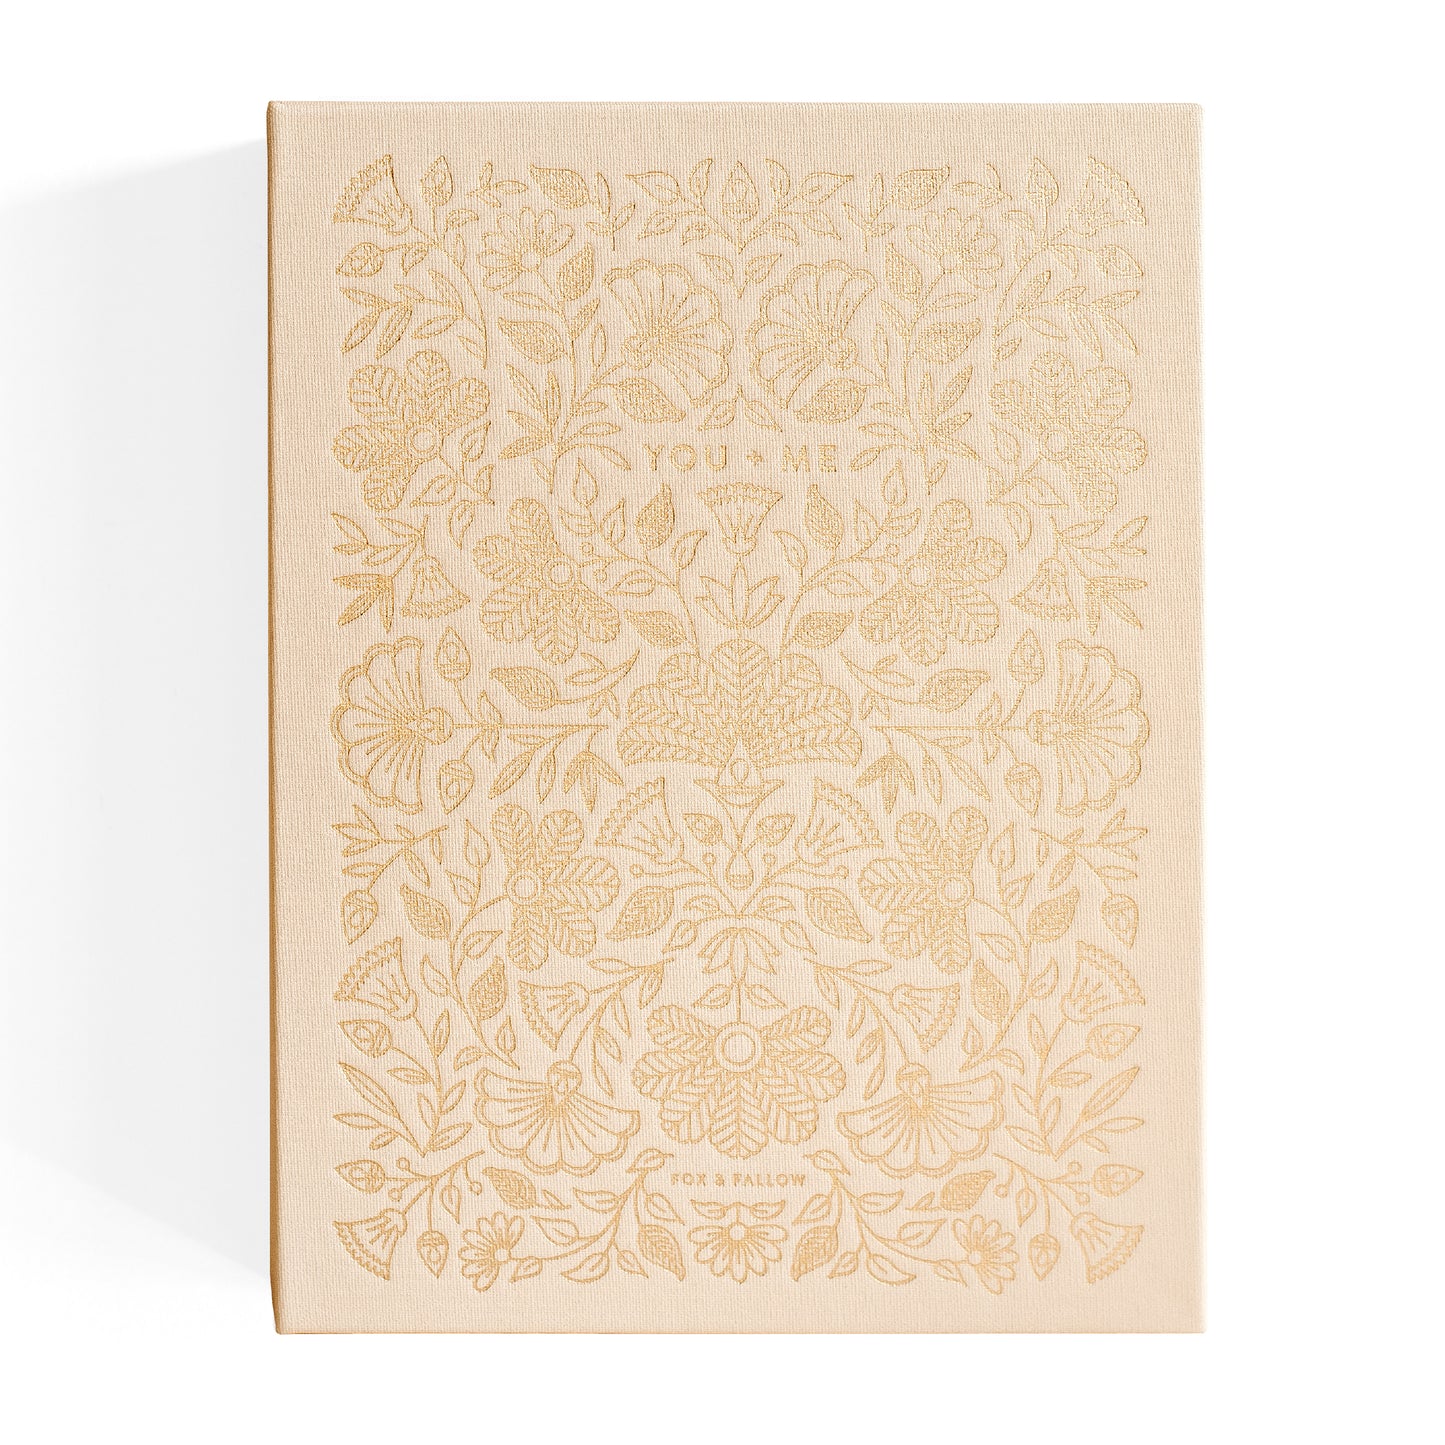 Wedding Planner Classic Champagne